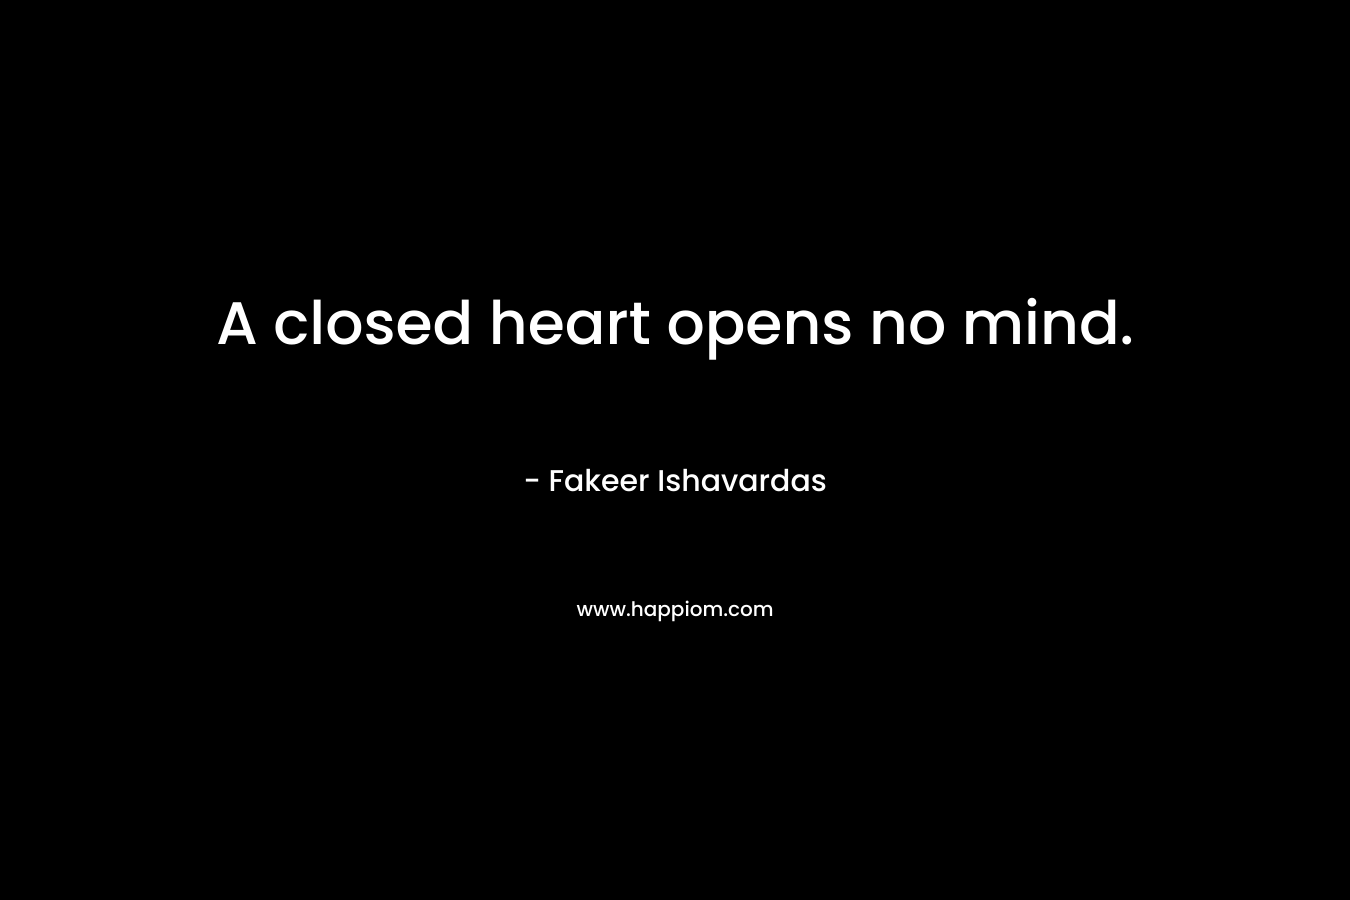 A closed heart opens no mind.